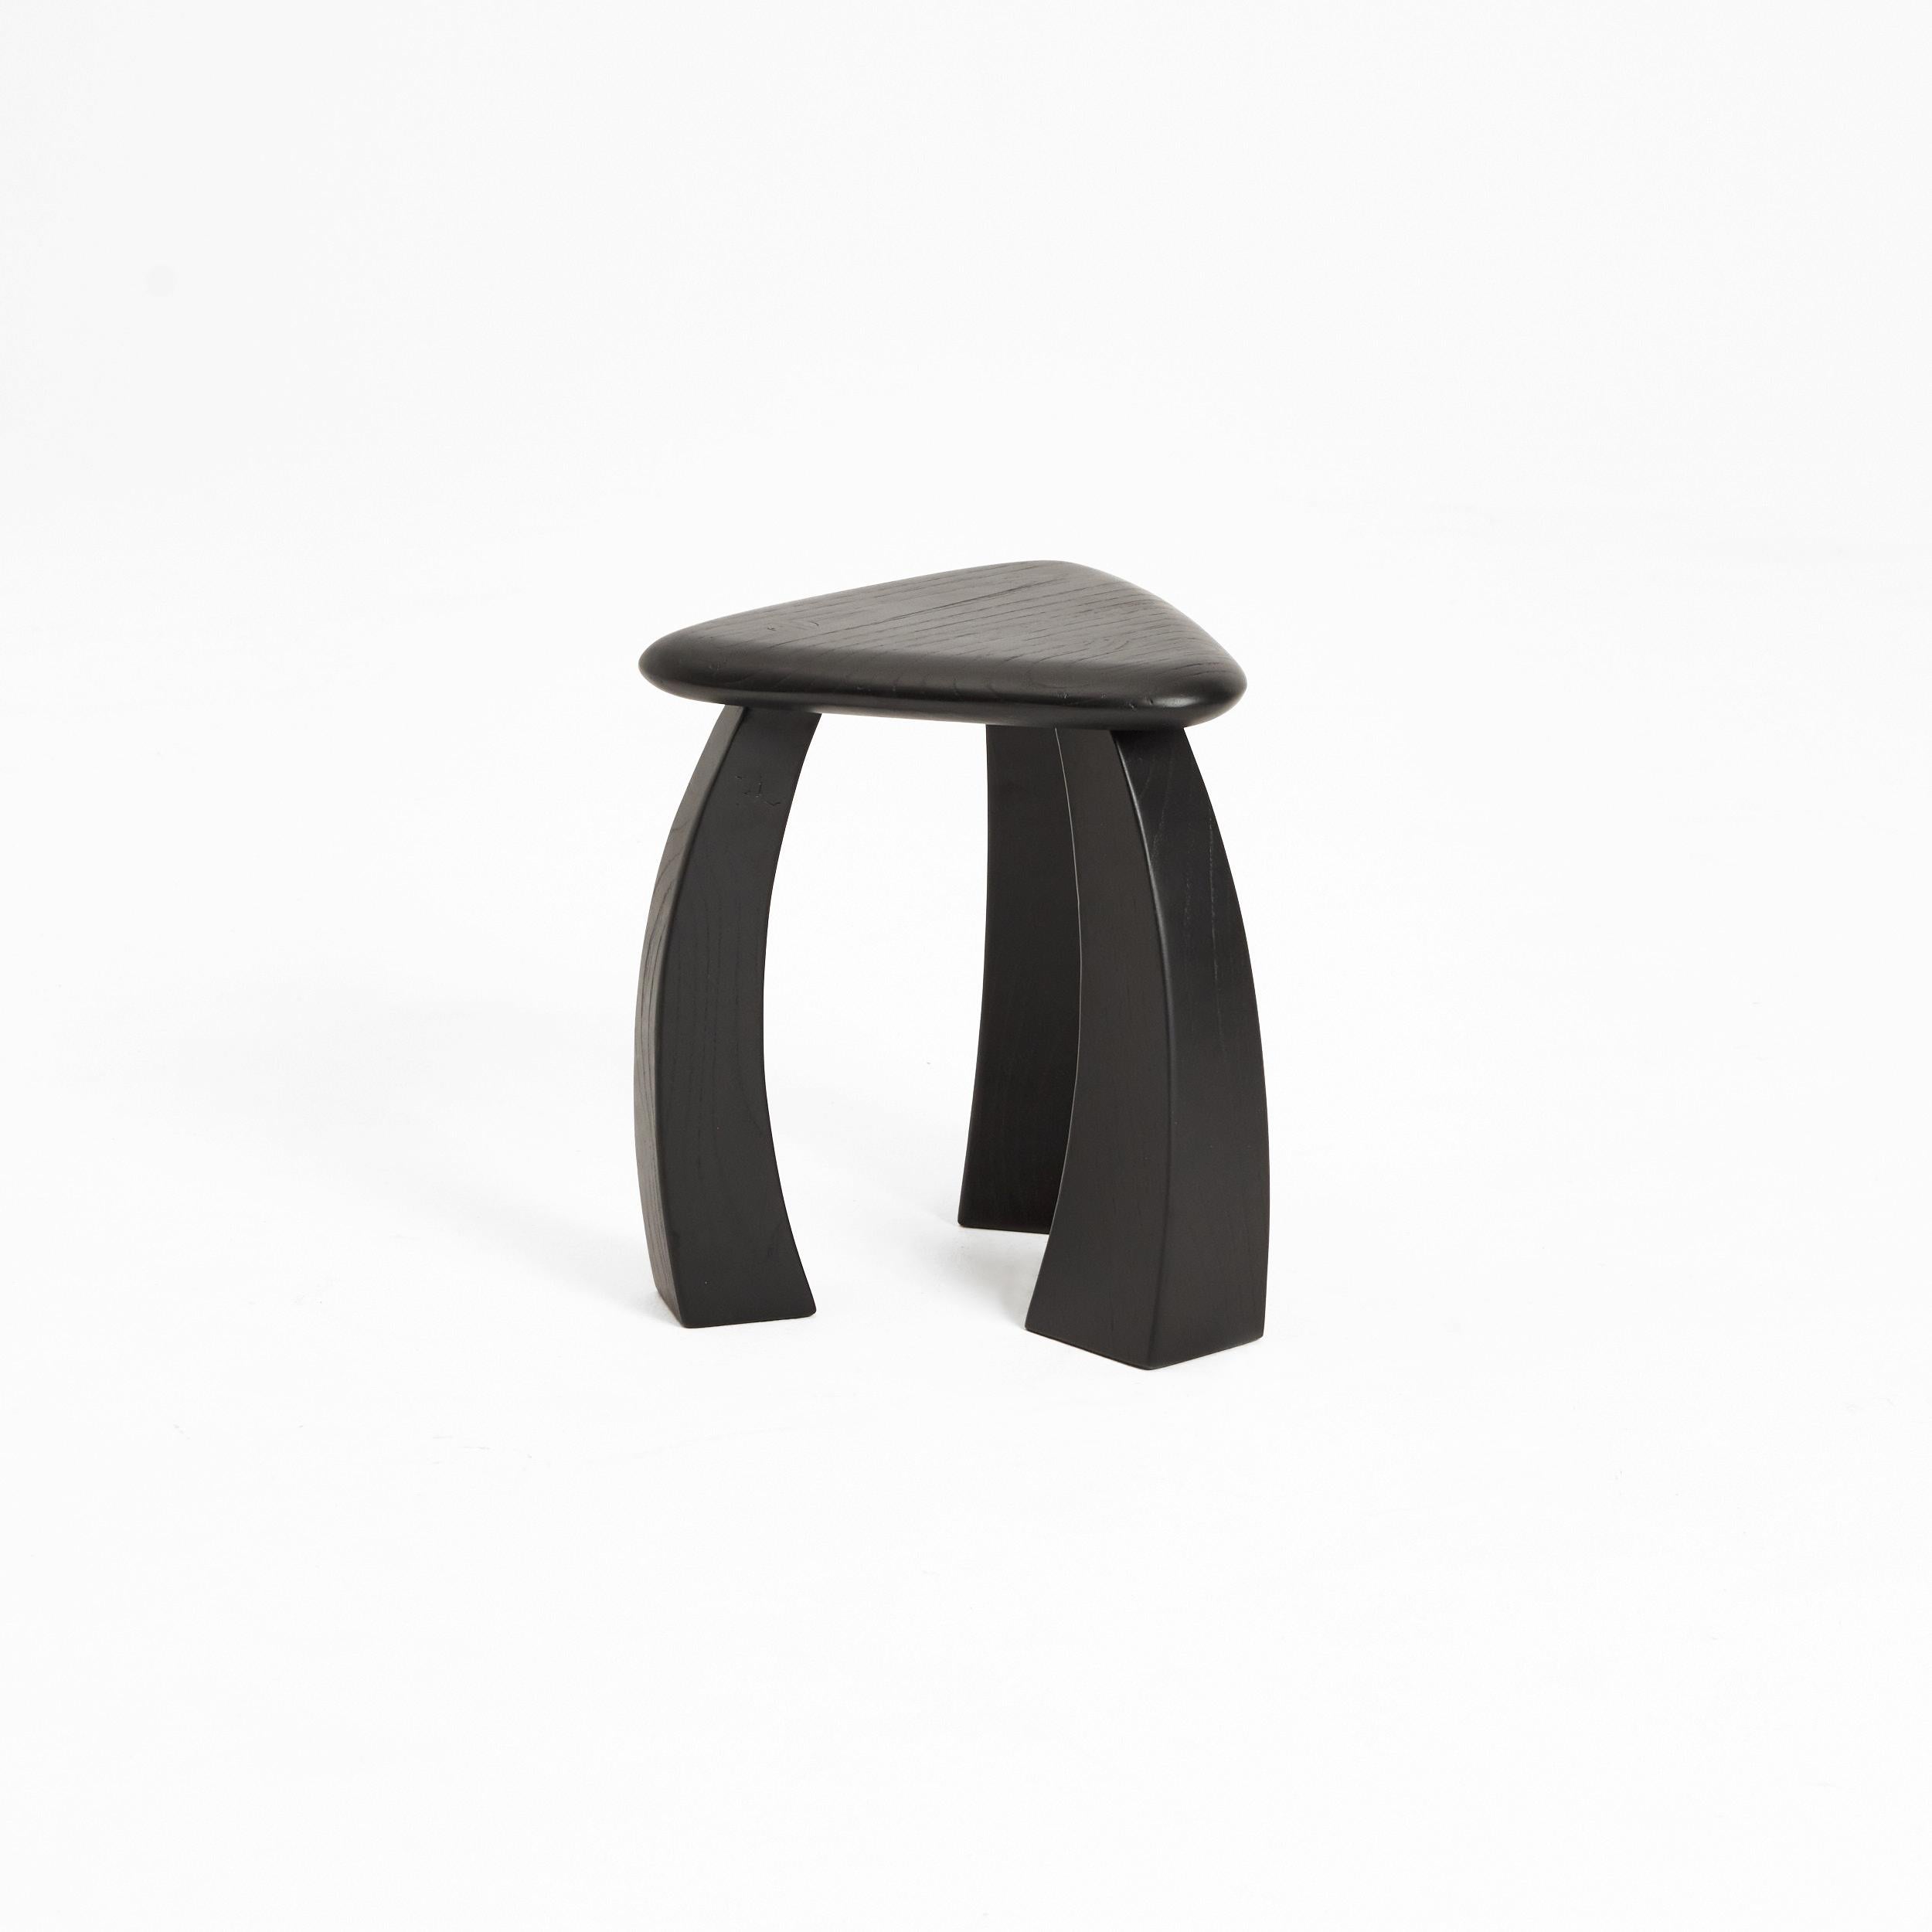 Arc de Stool 37 in black chestnut by Project 213A
Dimensions: D 33 x W 33 x H 37 cm
Materials: Chestnut wood. 

The smaller version of the stool's legs curves inwards towards its triangular seat, fusing to showcase exquisite craftsmanship. The